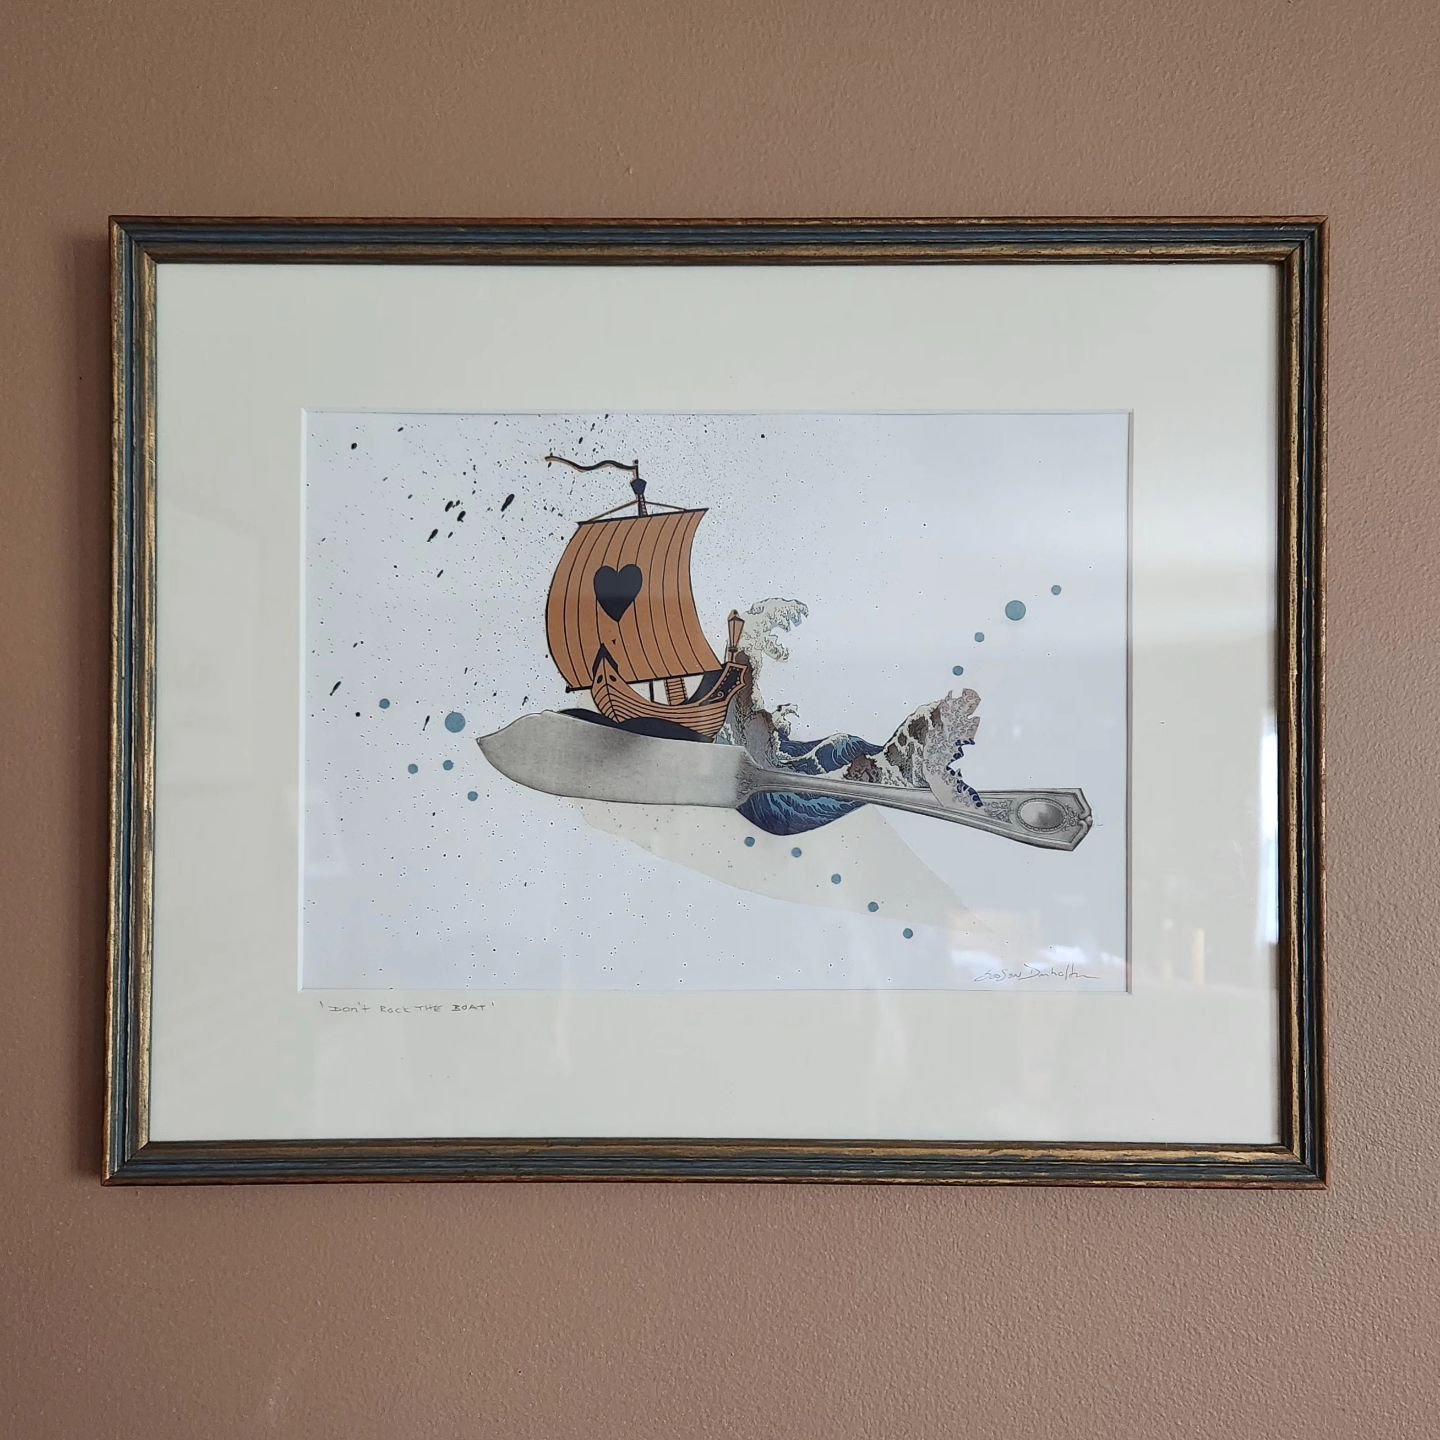 I am so happy with my newest addition to my collection. &quot;Don't Rock The Boat&quot; by Soosen Dunholter. Thanks to the Jaffrey Civic Center's silent auction.